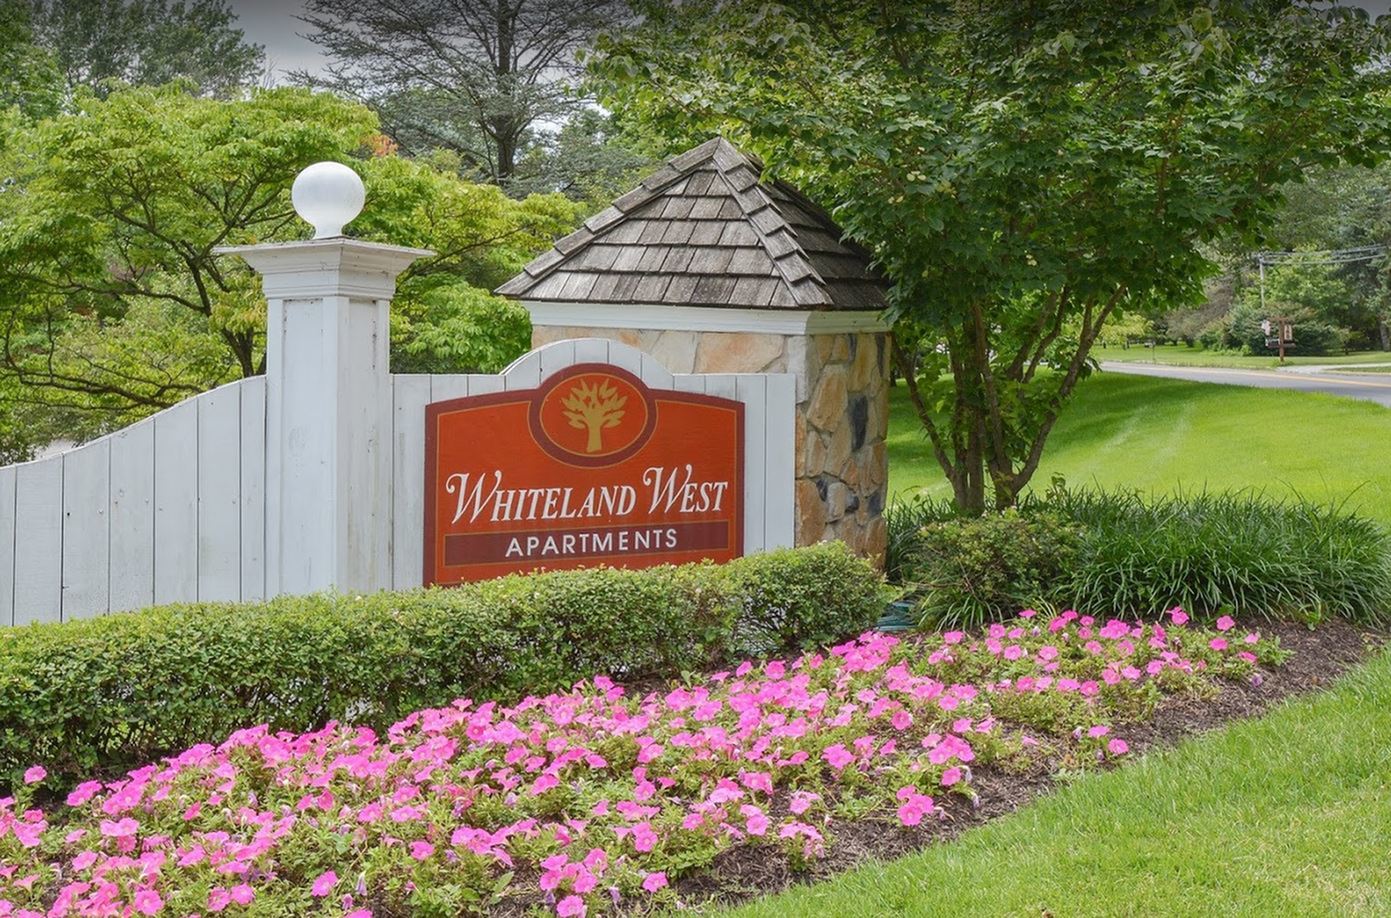 Entry sign to Whiteland West Apartments